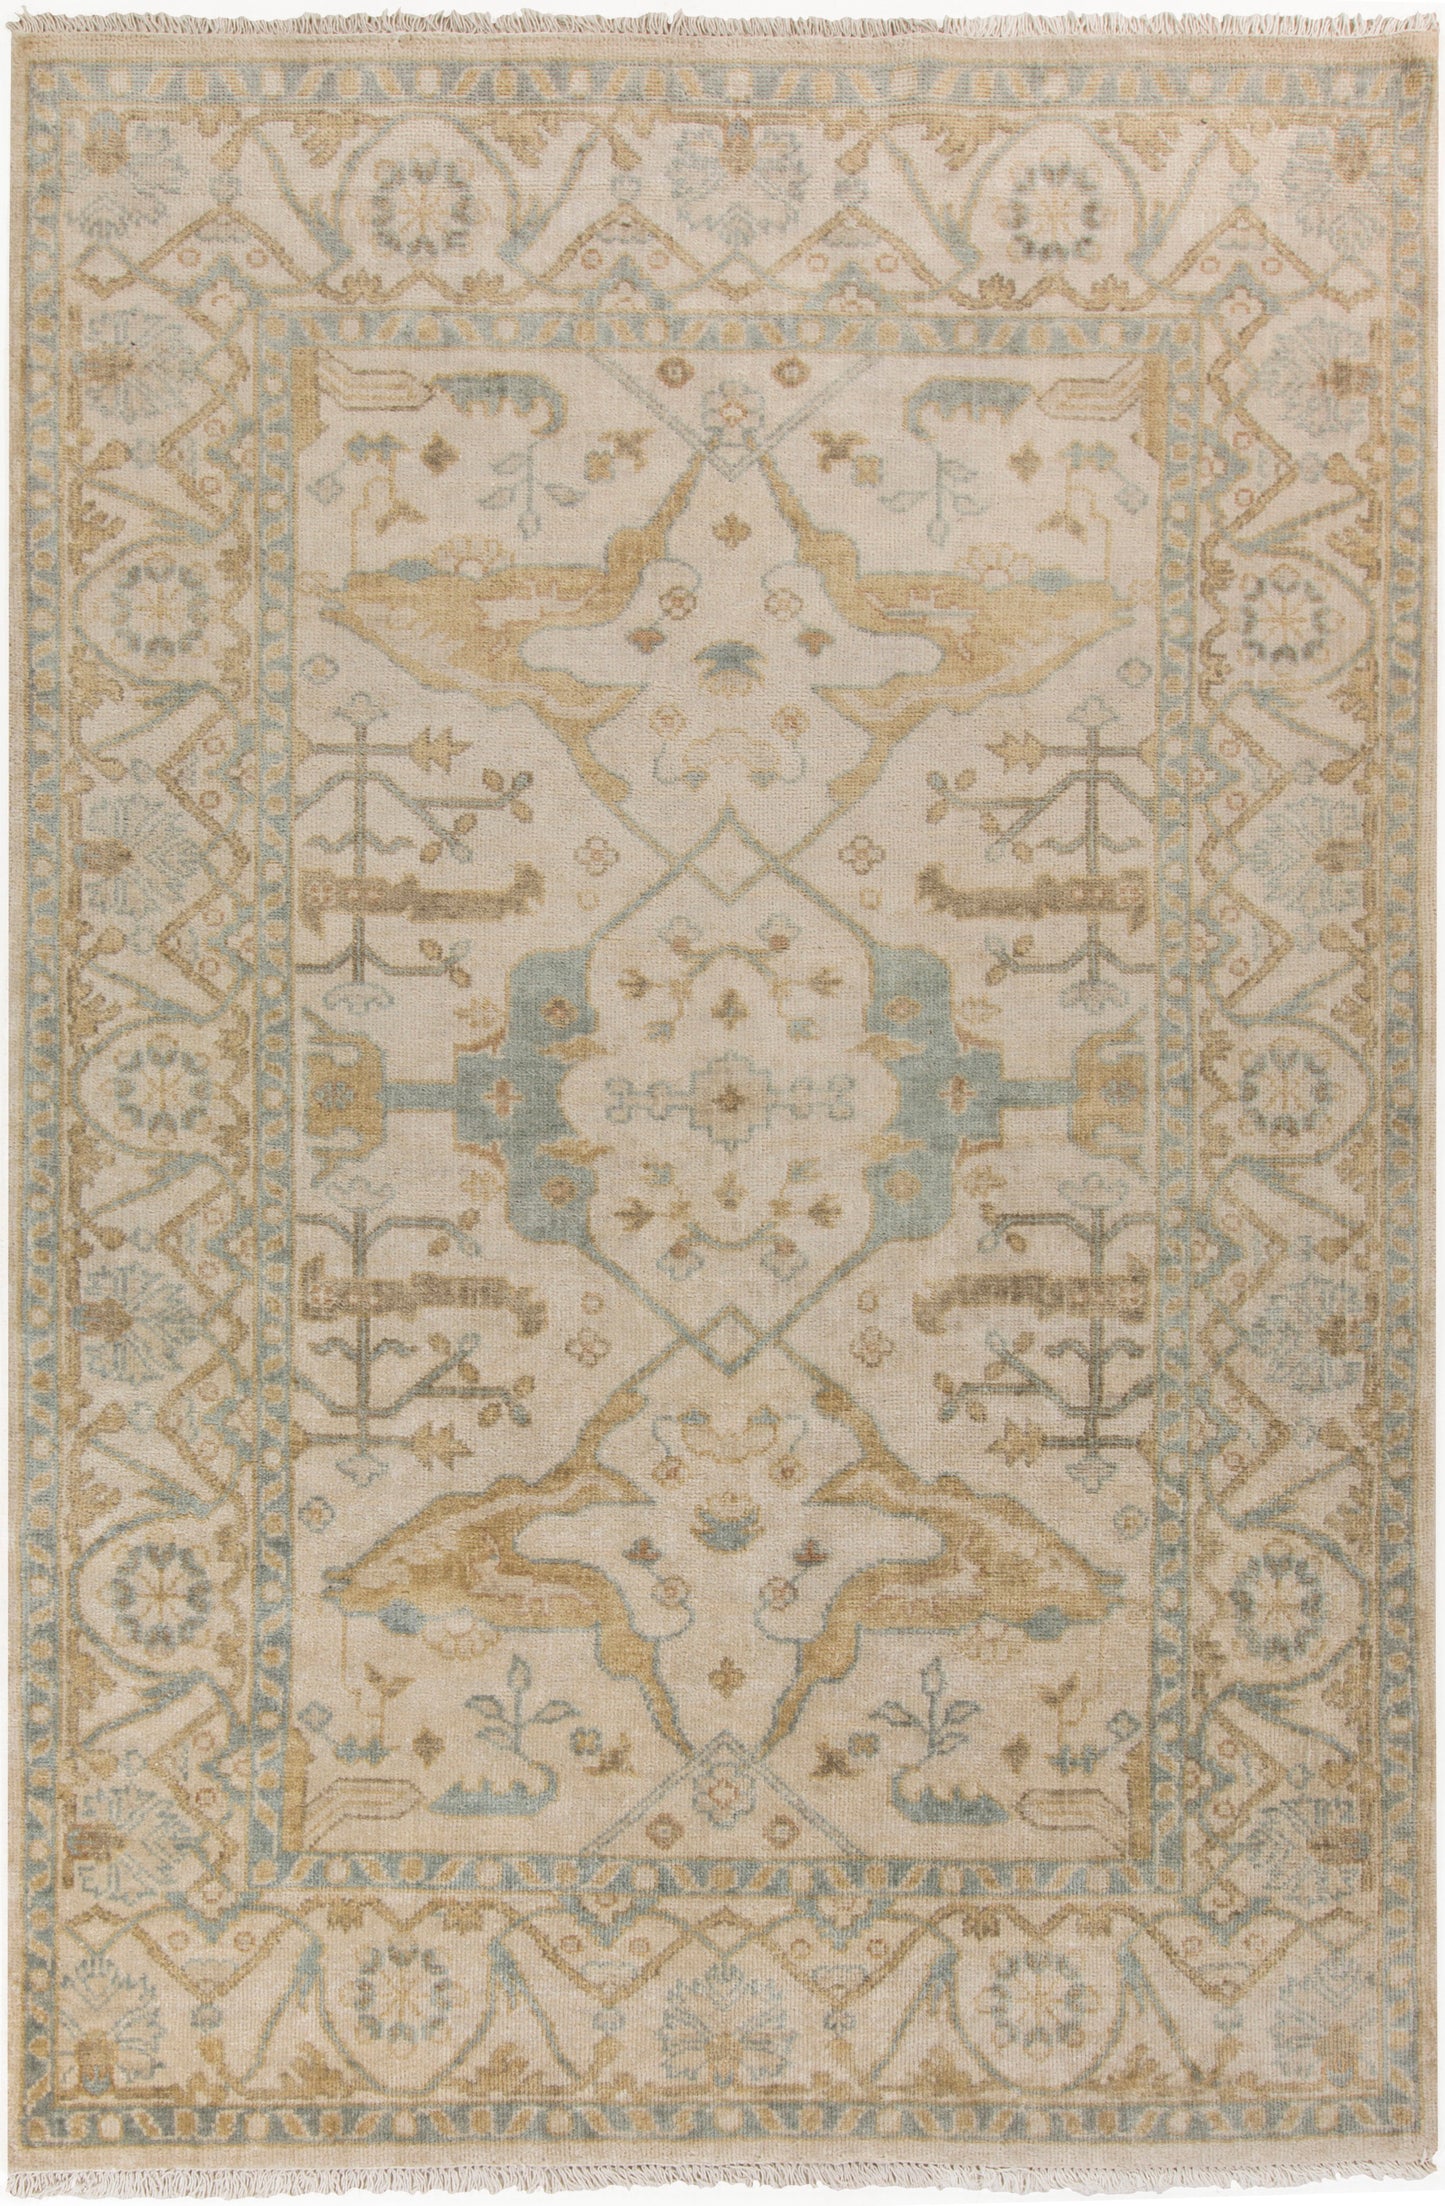 Antique 1148 Hand Knotted Wool Indoor Area Rug by Surya Rugs